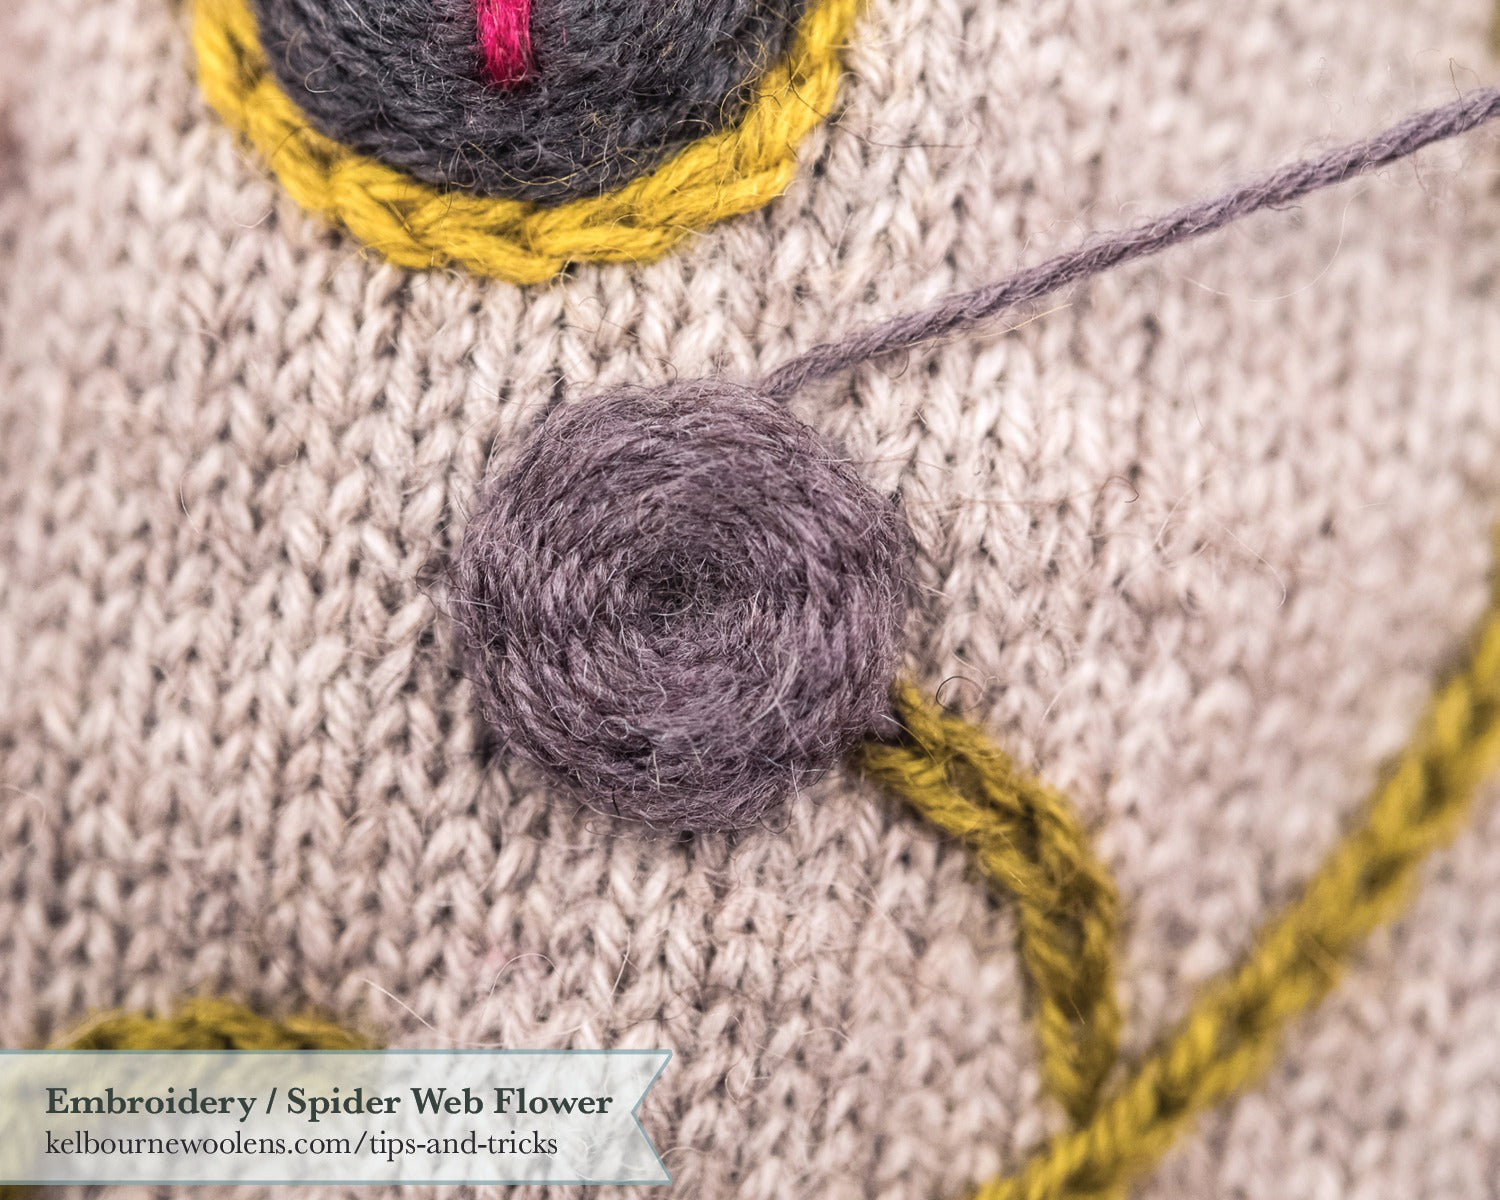 Embroidering on Knitting - Kelbourne Woolens